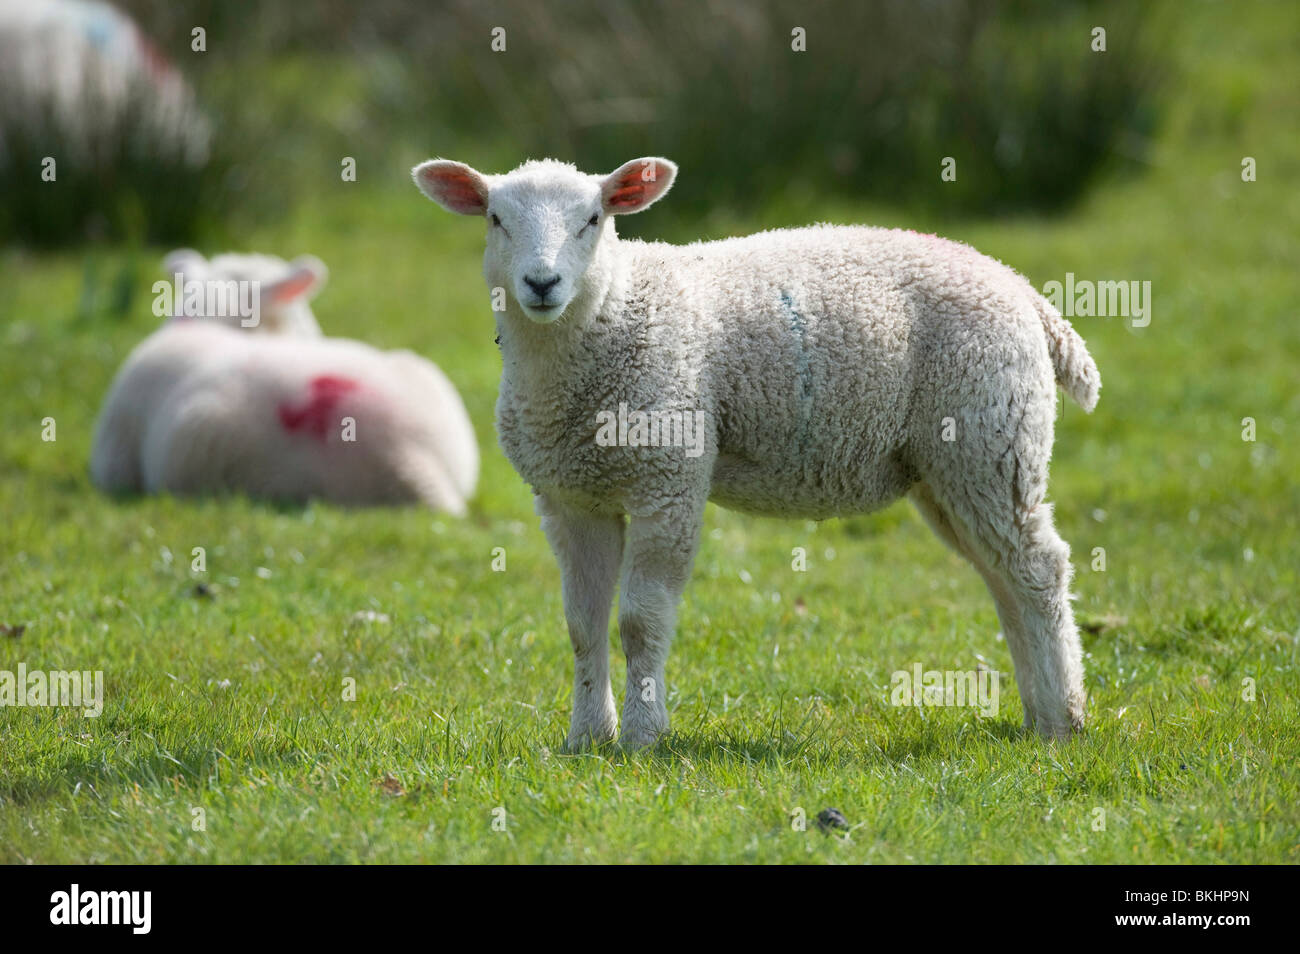 A young baby lamb grazing in a grass field in devon Stock Photo